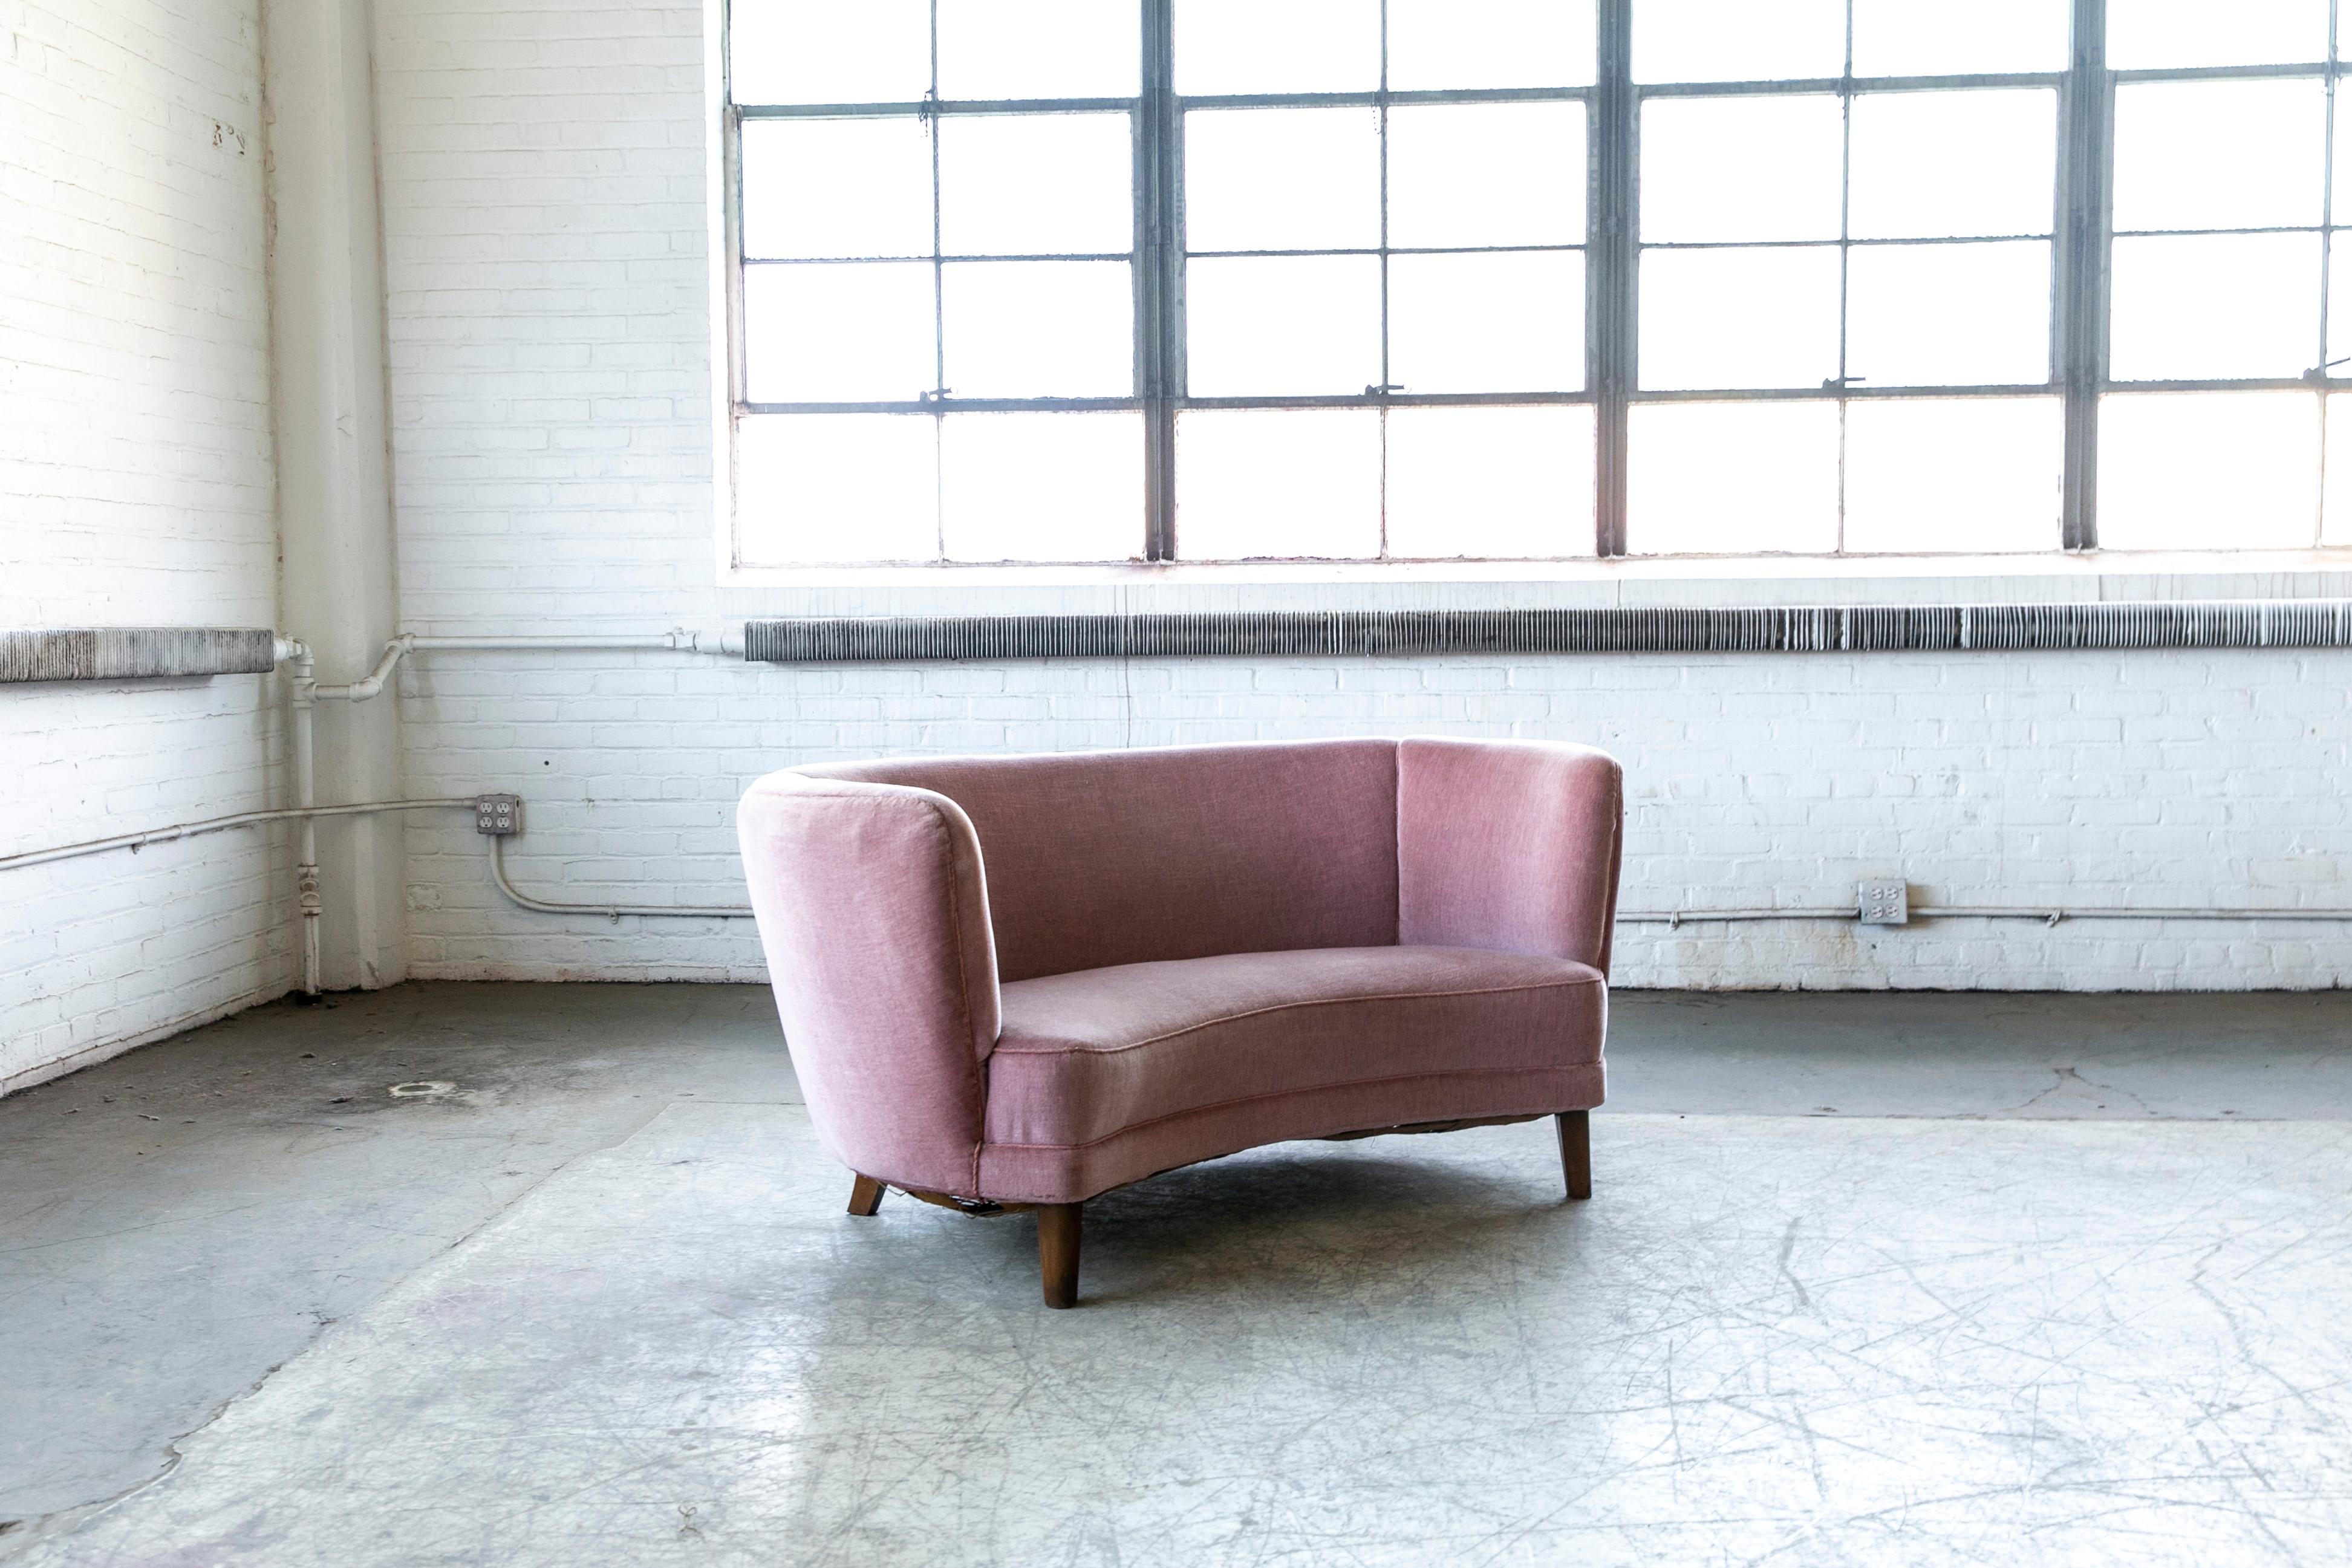 Beautiful and very elegant 1940s curved two-seat sofa or in rose pink mohair wool fabric. This sofa has slightly taller legs indicating a production date closer to 1950 when taller legs became more popular. The sofa has springs in the seat and the